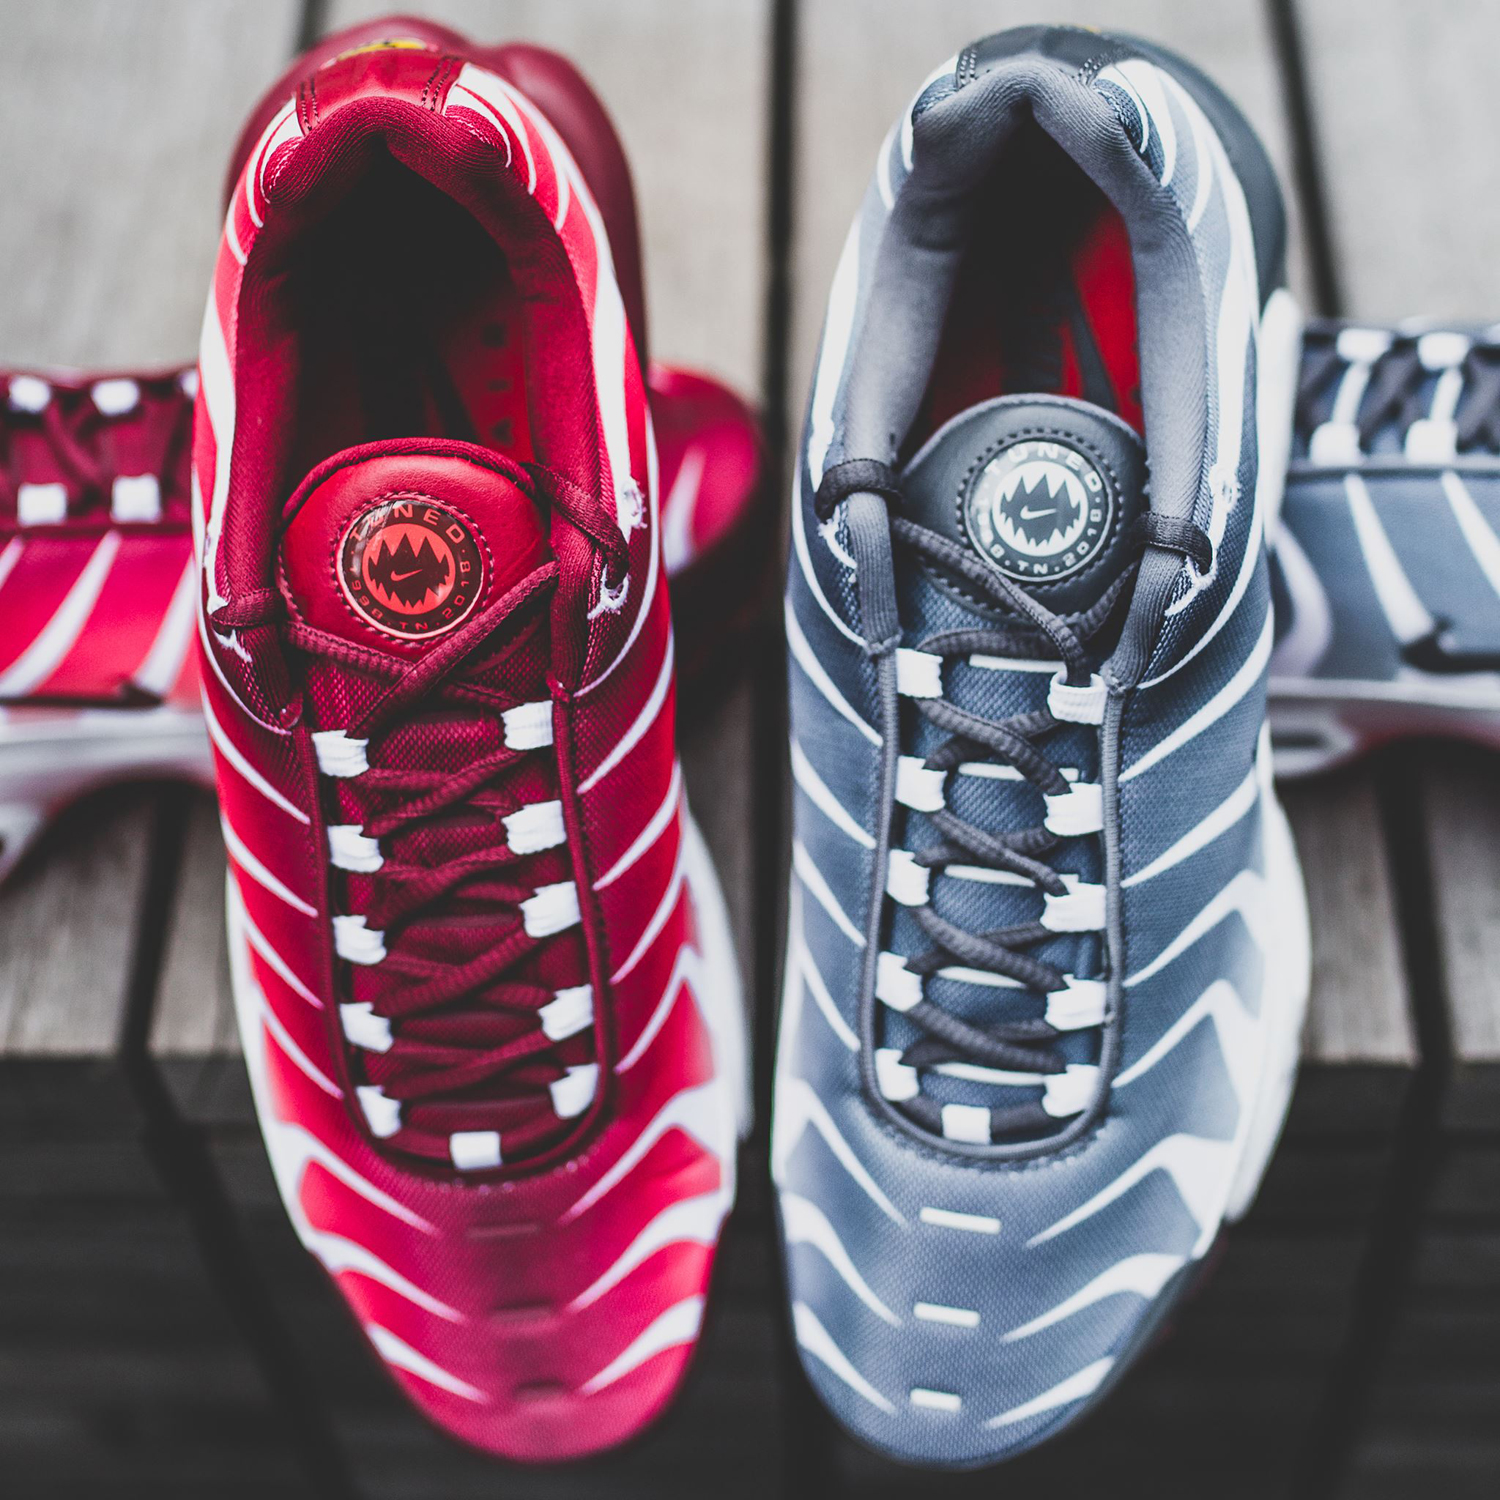 Nike Air Max Plus Before and After the 